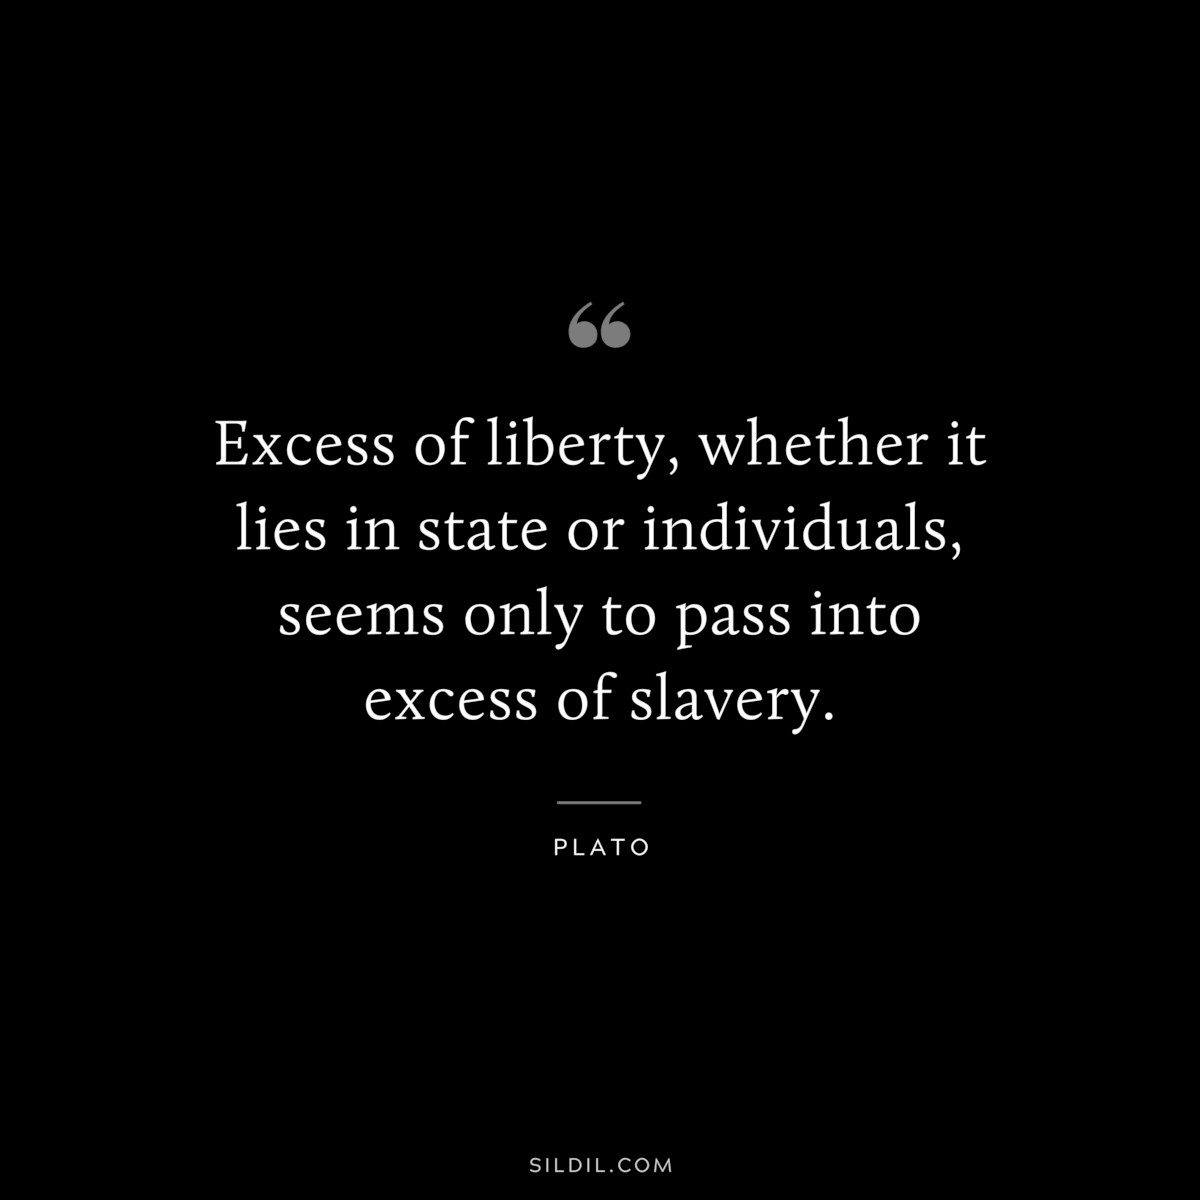 Excess of liberty, whether it lies in state or individuals, seems only to pass into excess of slavery. ― Plato